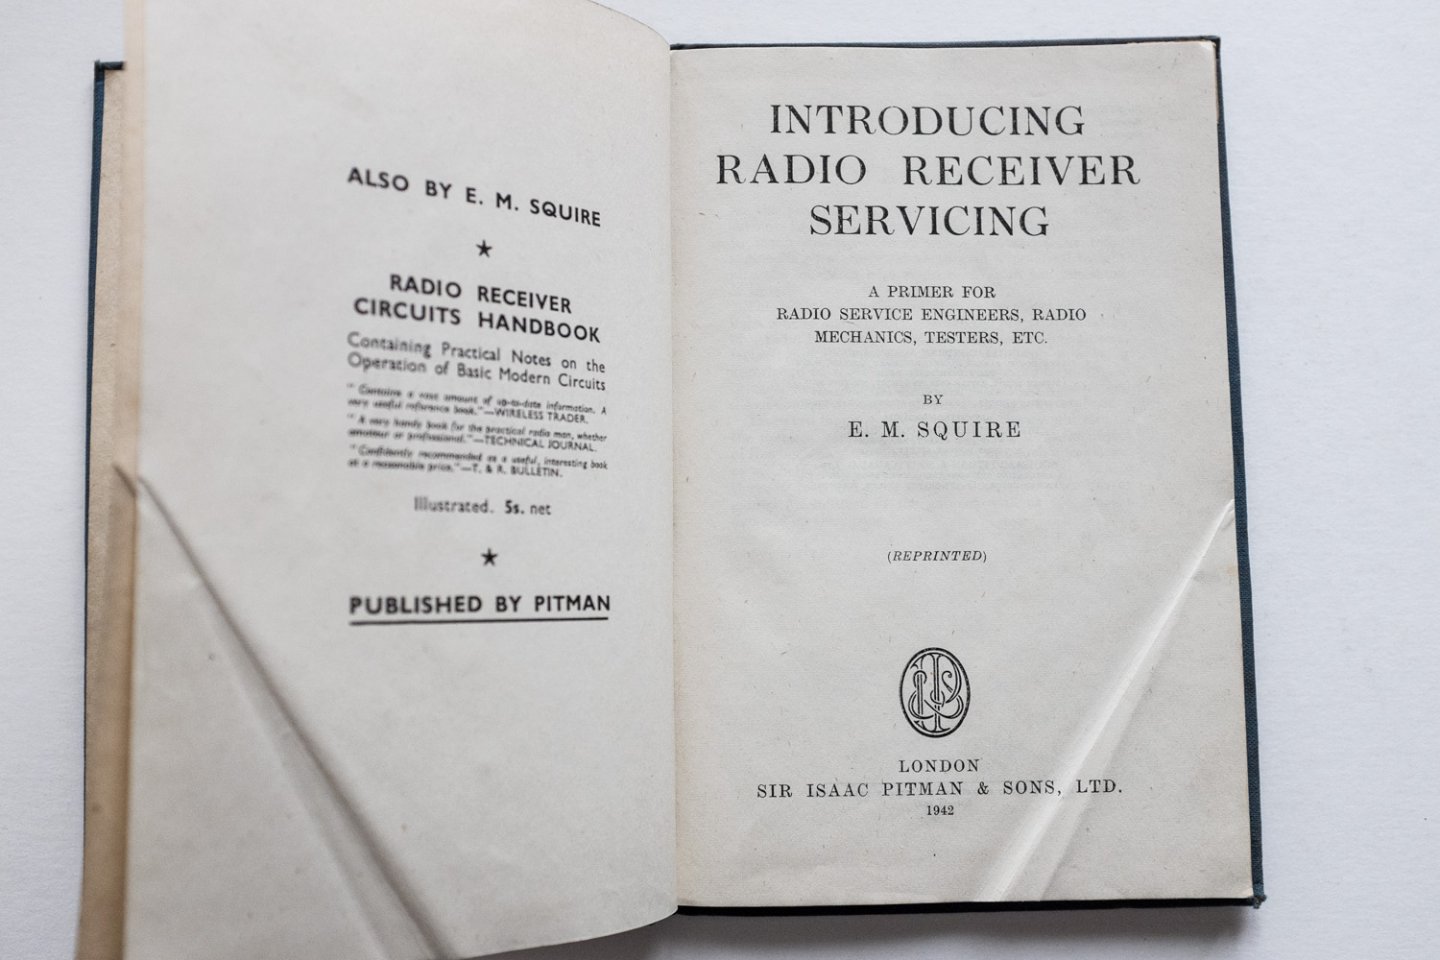 Squire, E.M. - Introducing radio receiver servicing - a primer for radio service engineers, radio mechanics, testers, etc.